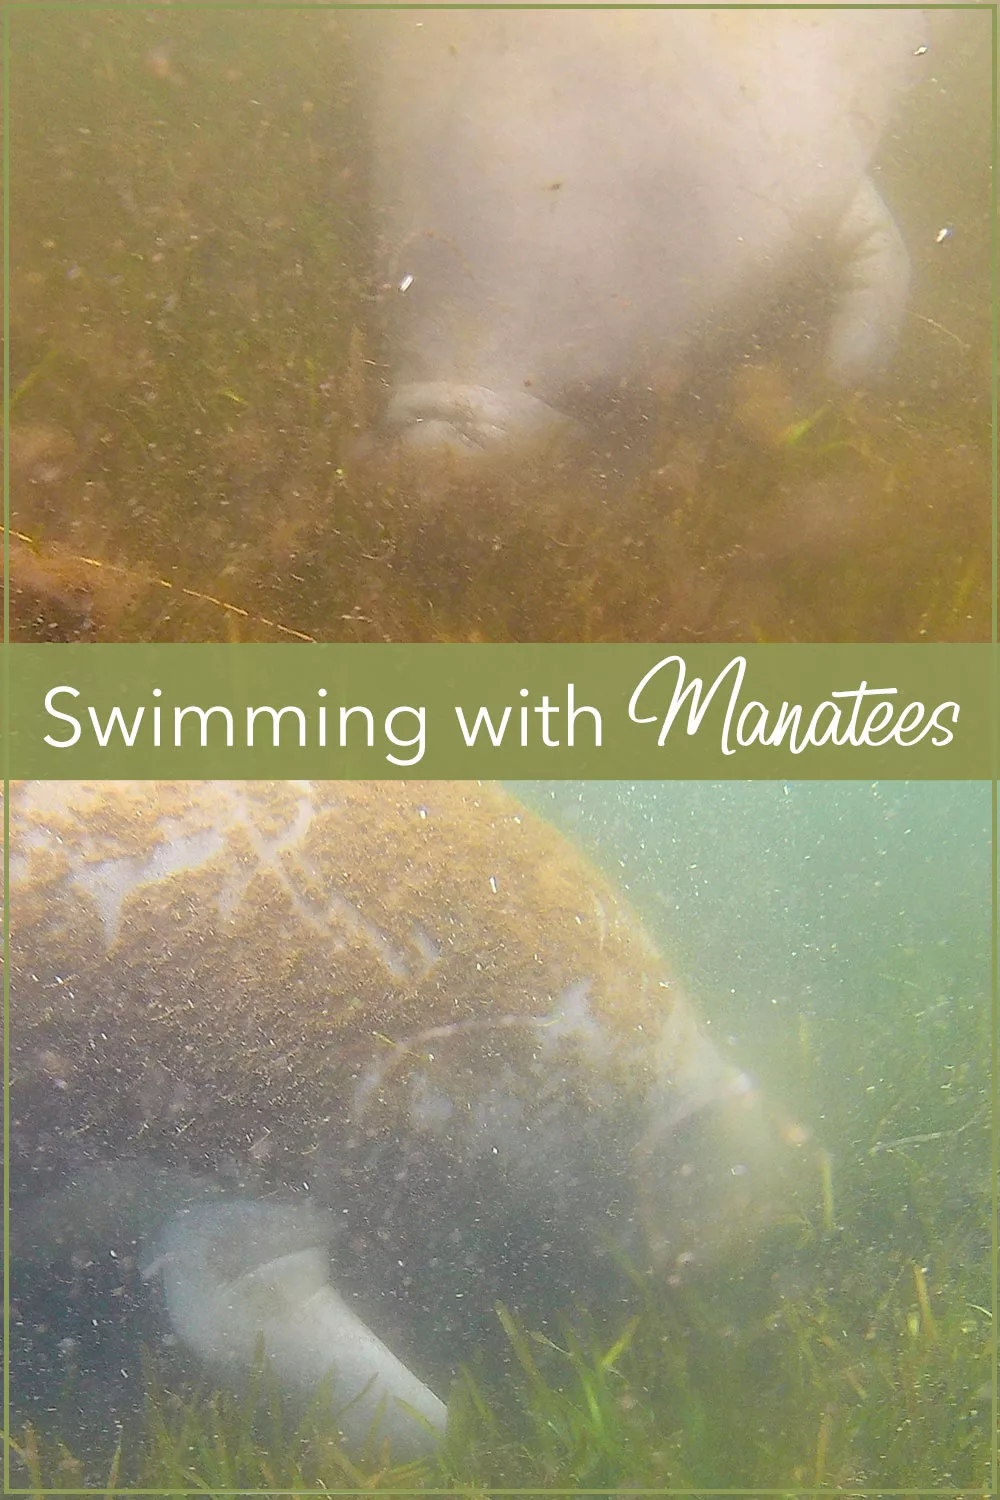 Swimming with Manatees in Crystal River